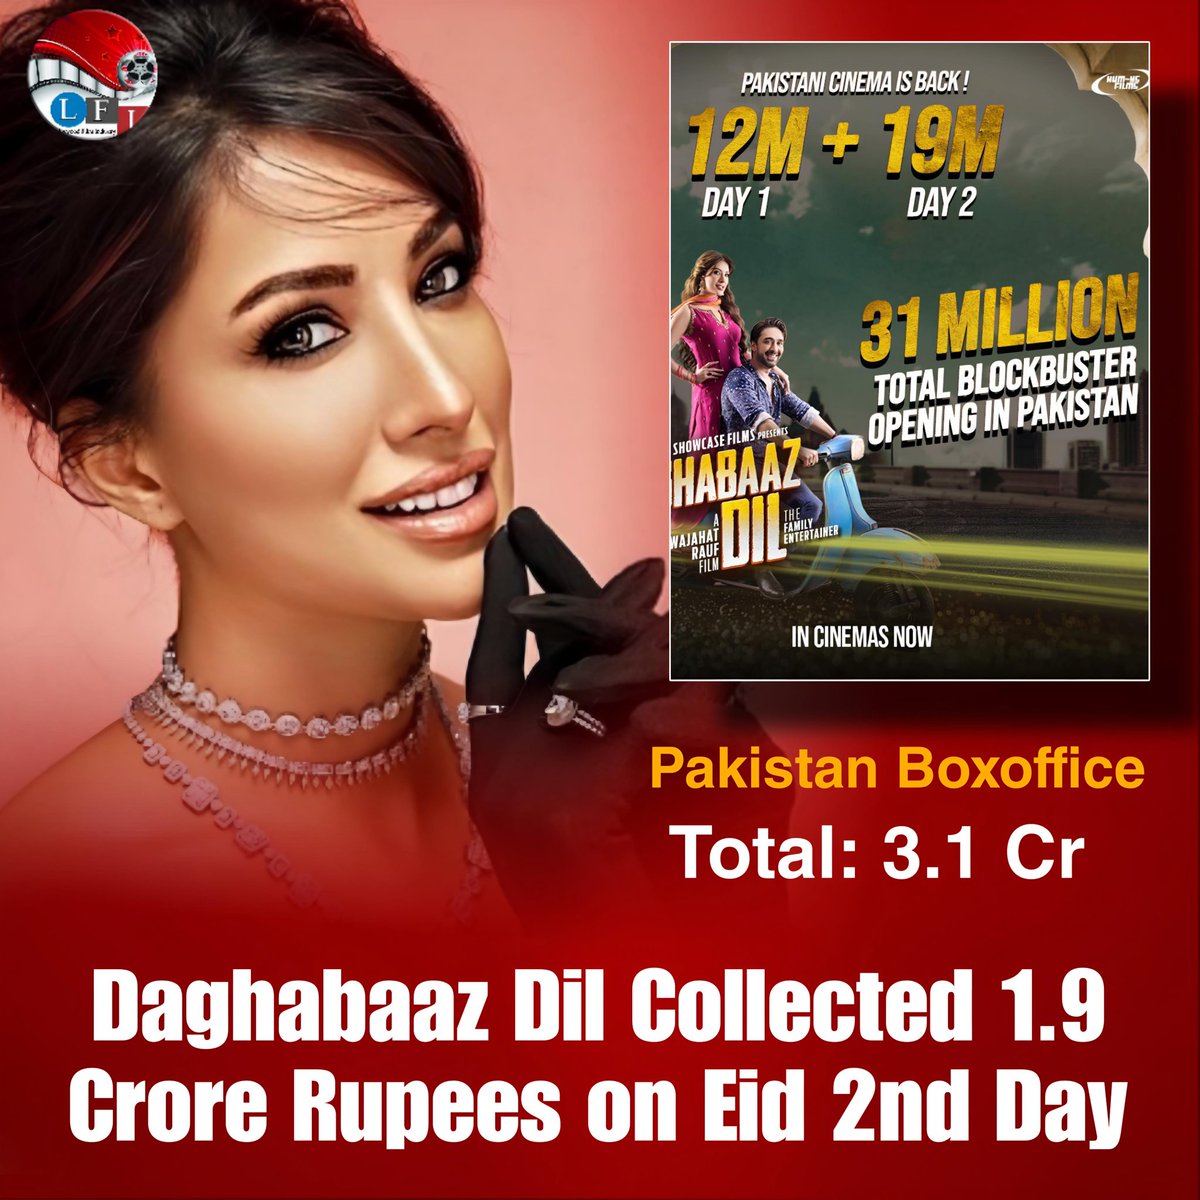 Super Star Mehwish Hayat Boost The Boxoffice for Local Films as Daghabaaz Dil Collected 1.9 Cr Rupees on Eid 2nd Day and take the total to 3.1 Cr rupees in first two days of its release.

#MehwishHayat #AliRehmanKhan 
#MominSaqib #daghabaazdil